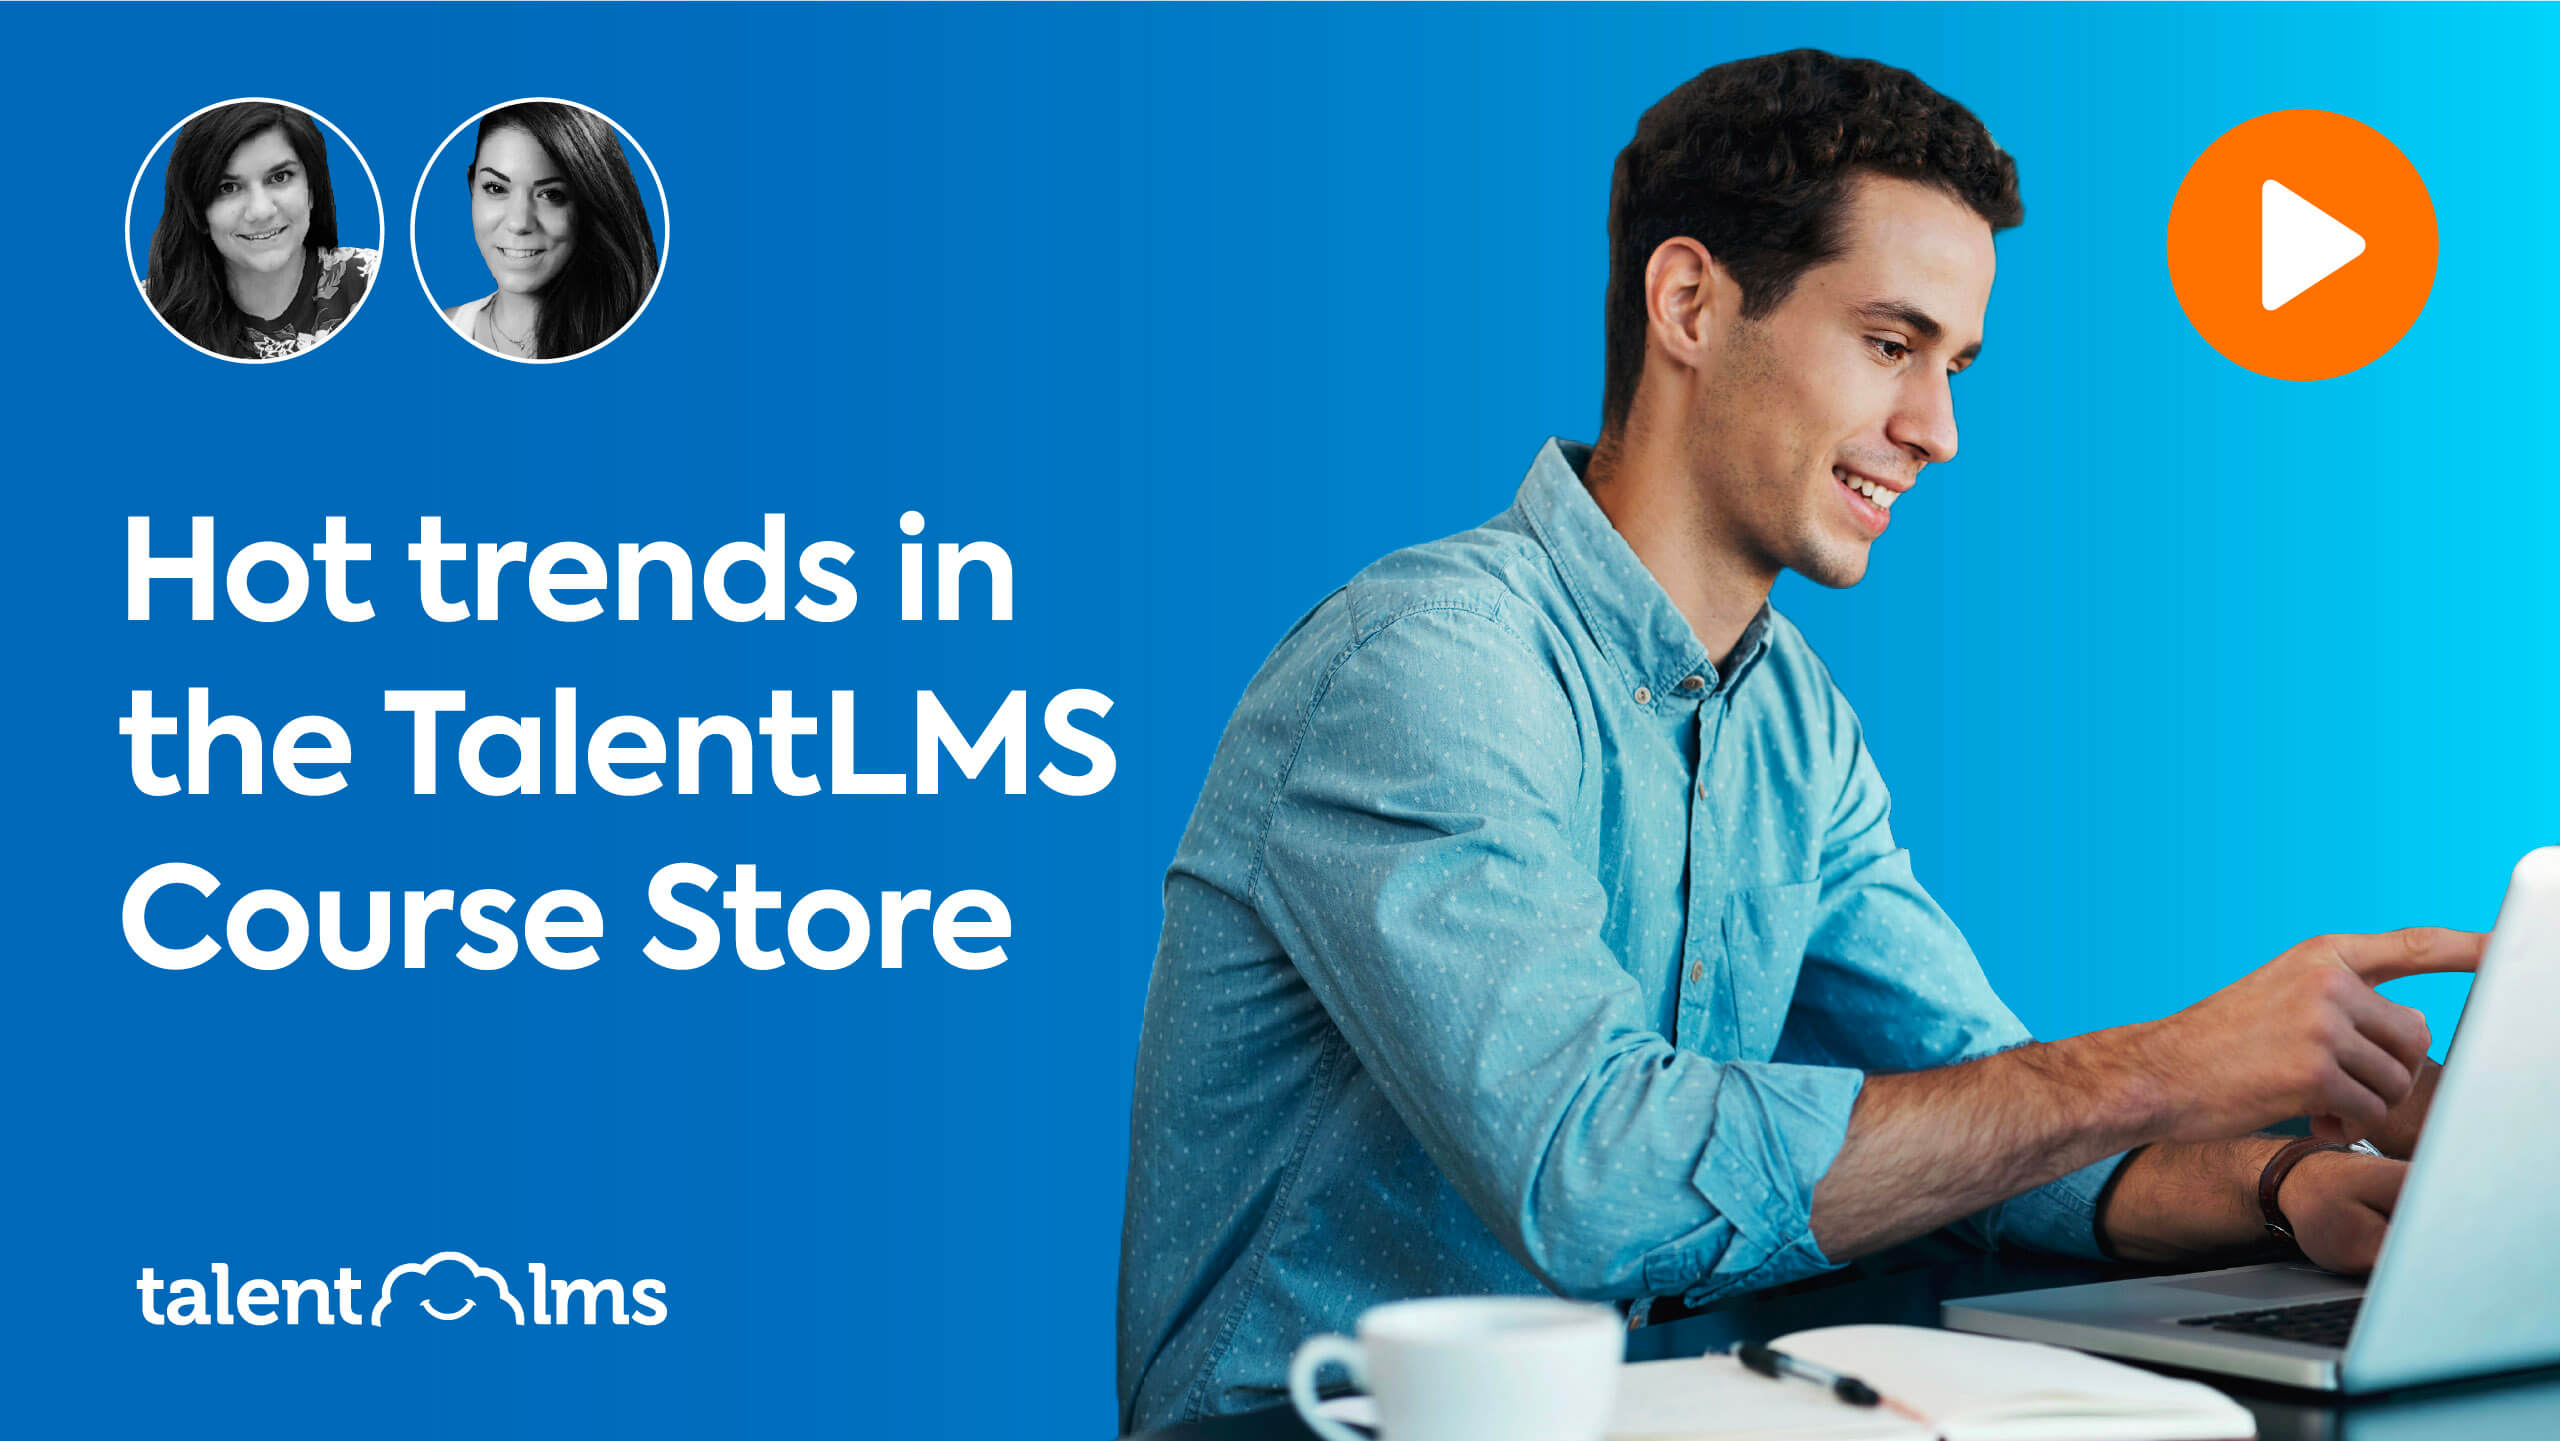 Hot trends in the TalentLMS Course Store